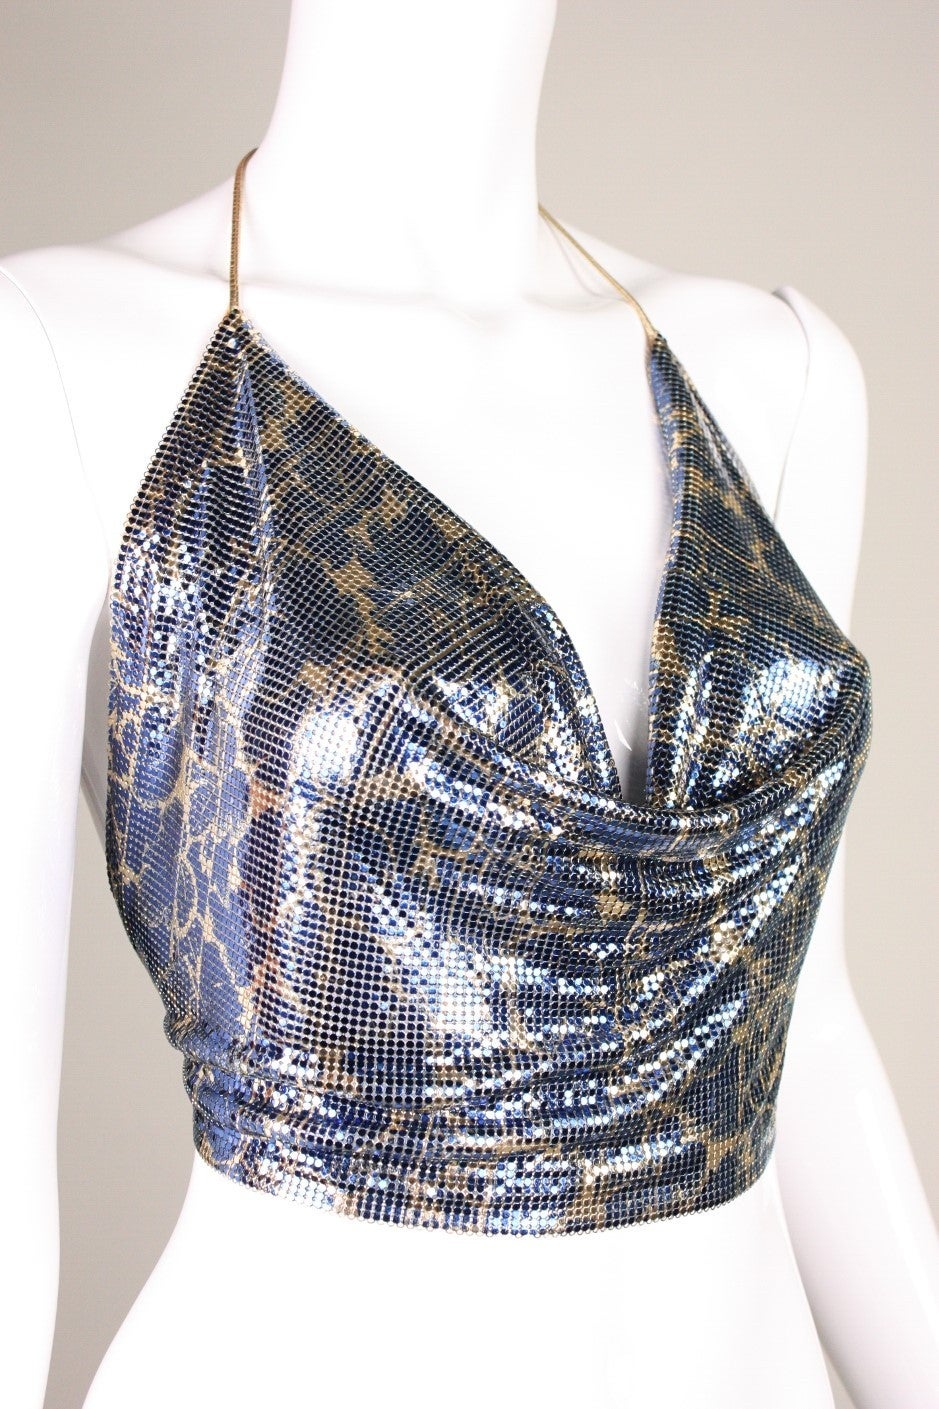 Vintage halter top from Whiting & Davis is made of printed gold and blue metal mesh.  Gold leather ties at neckline and waist.  Mesh drapes beautifully into a cowl neckline.  Unlined.

No size label, but we believe it is an open size; however, the